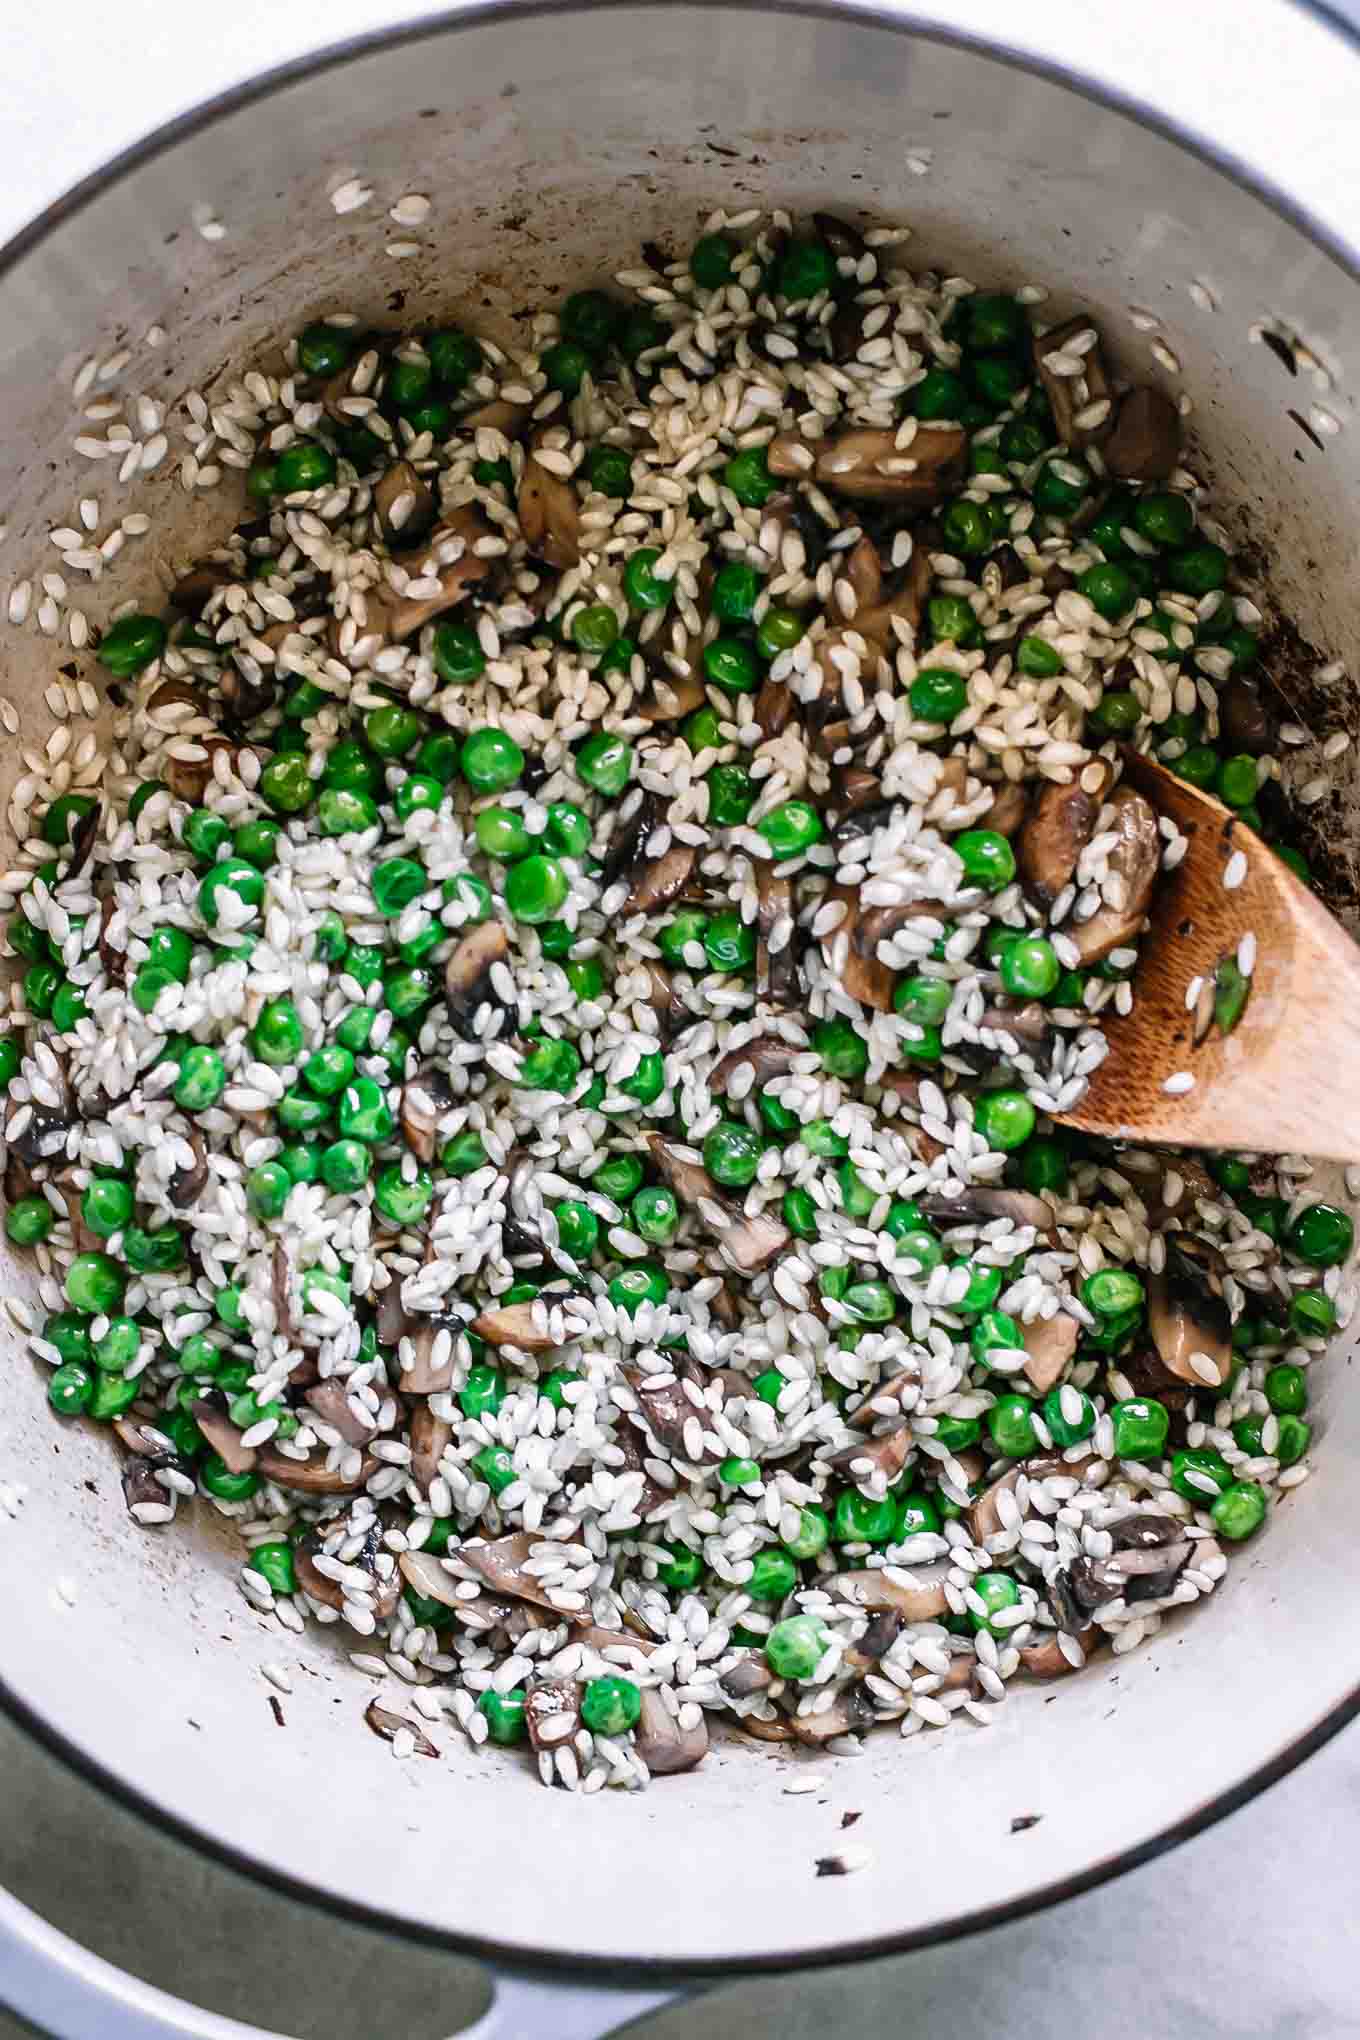 risotto rice, mushrooms, truffles, and peas in a large pot